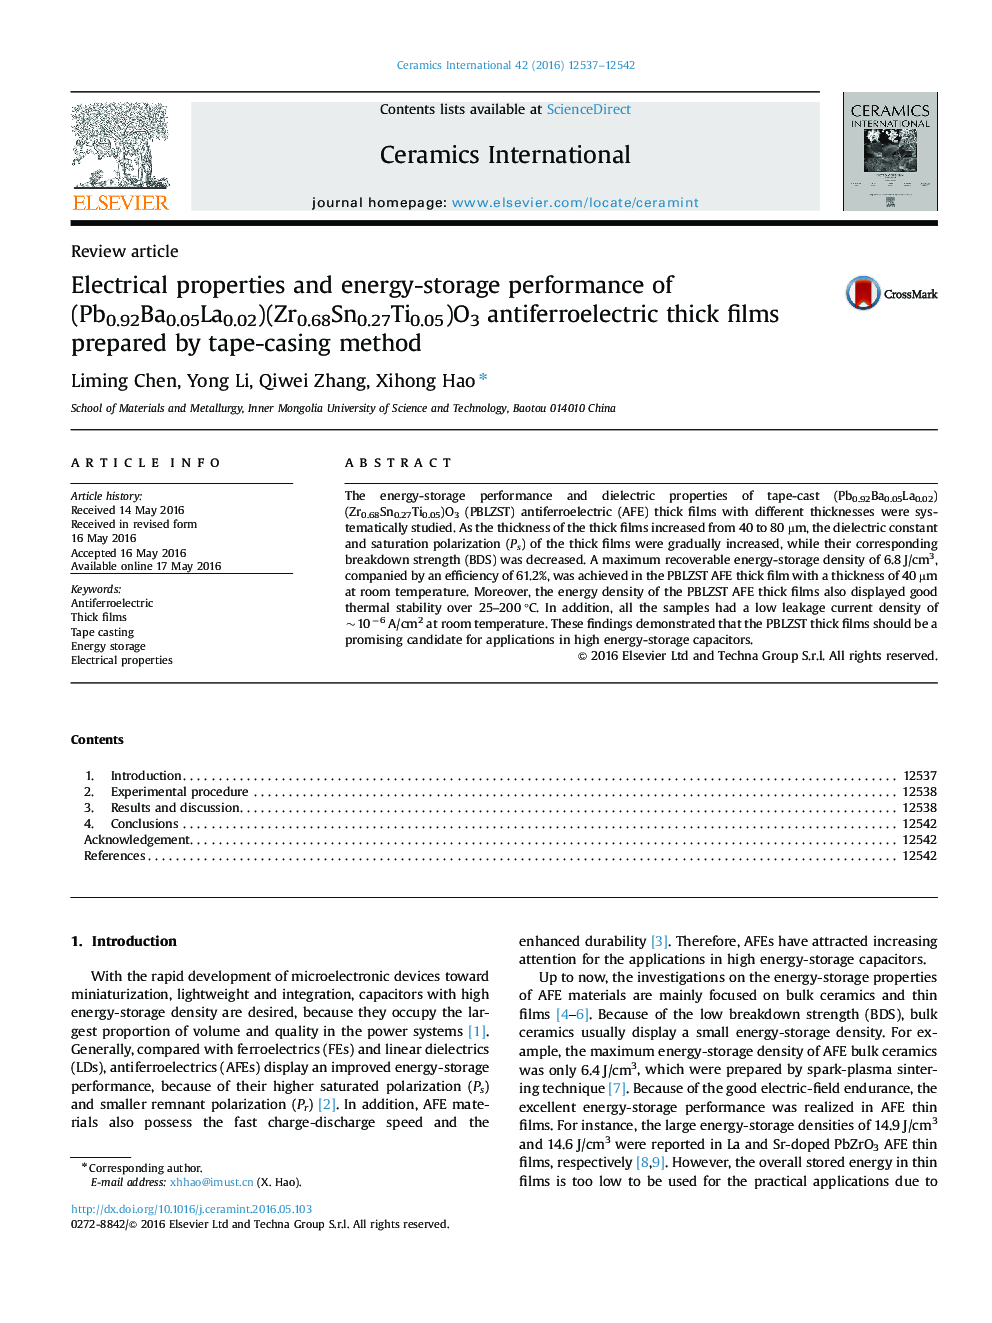 Electrical properties and energy-storage performance of (Pb0.92Ba0.05La0.02)(Zr0.68Sn0.27Ti0.05)O3 antiferroelectric thick films prepared by tape-casing method